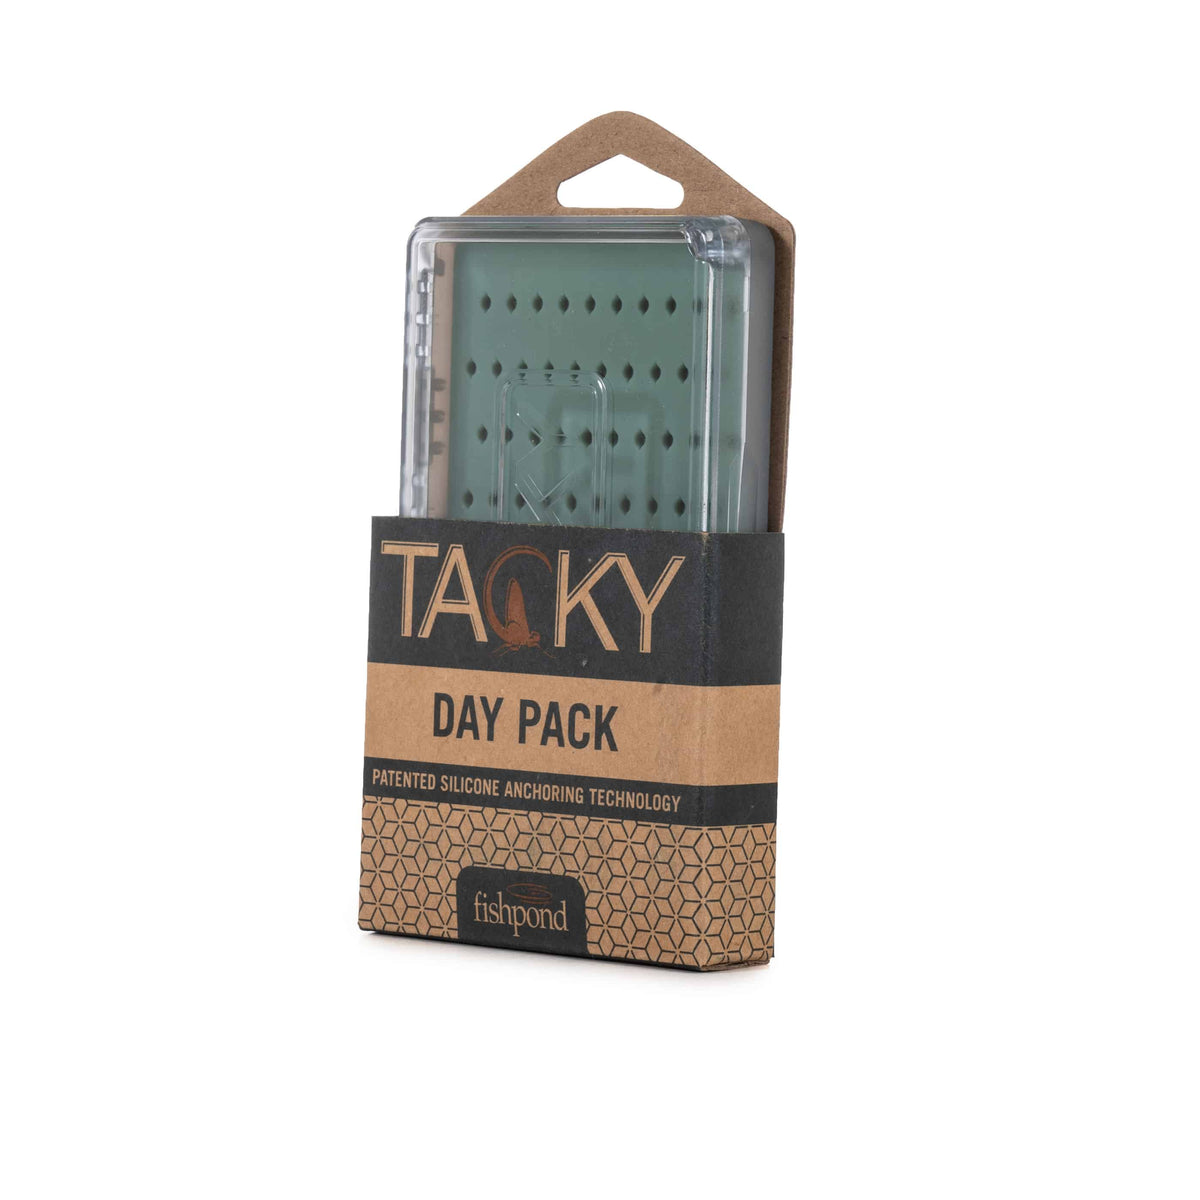 Tacky Day Pack Fly Box Single Sided Fly Box With Silicone Storage Package